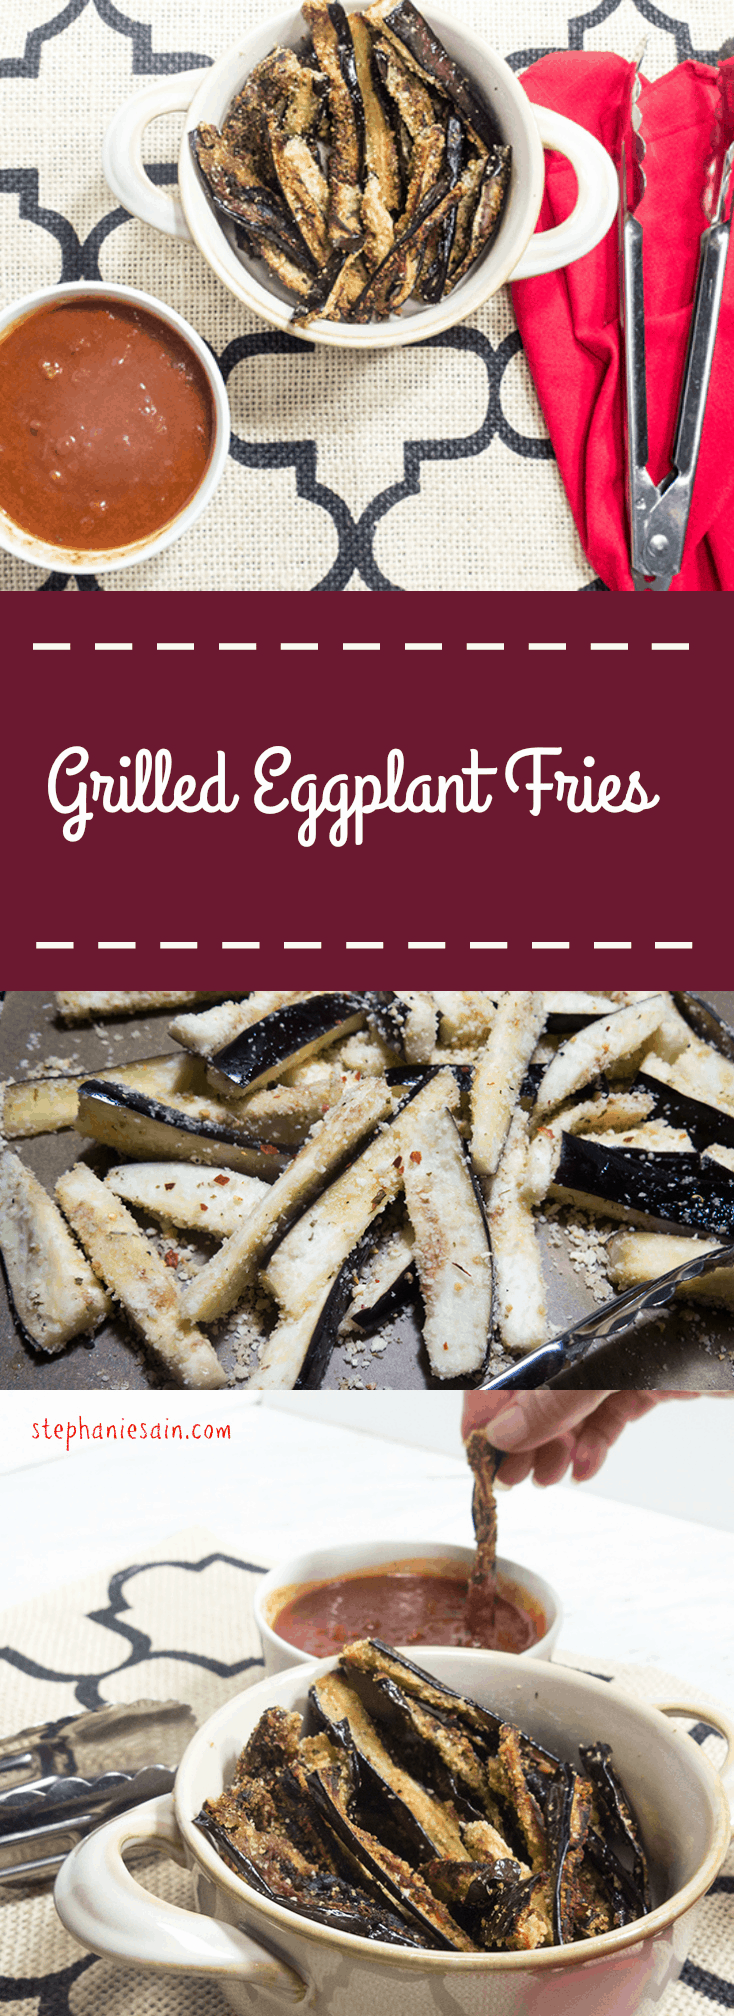 Grilled Eggplant Fries are a tasty, healthy way to have fries. Also make a great appetizer. Vegan and Gluten free.